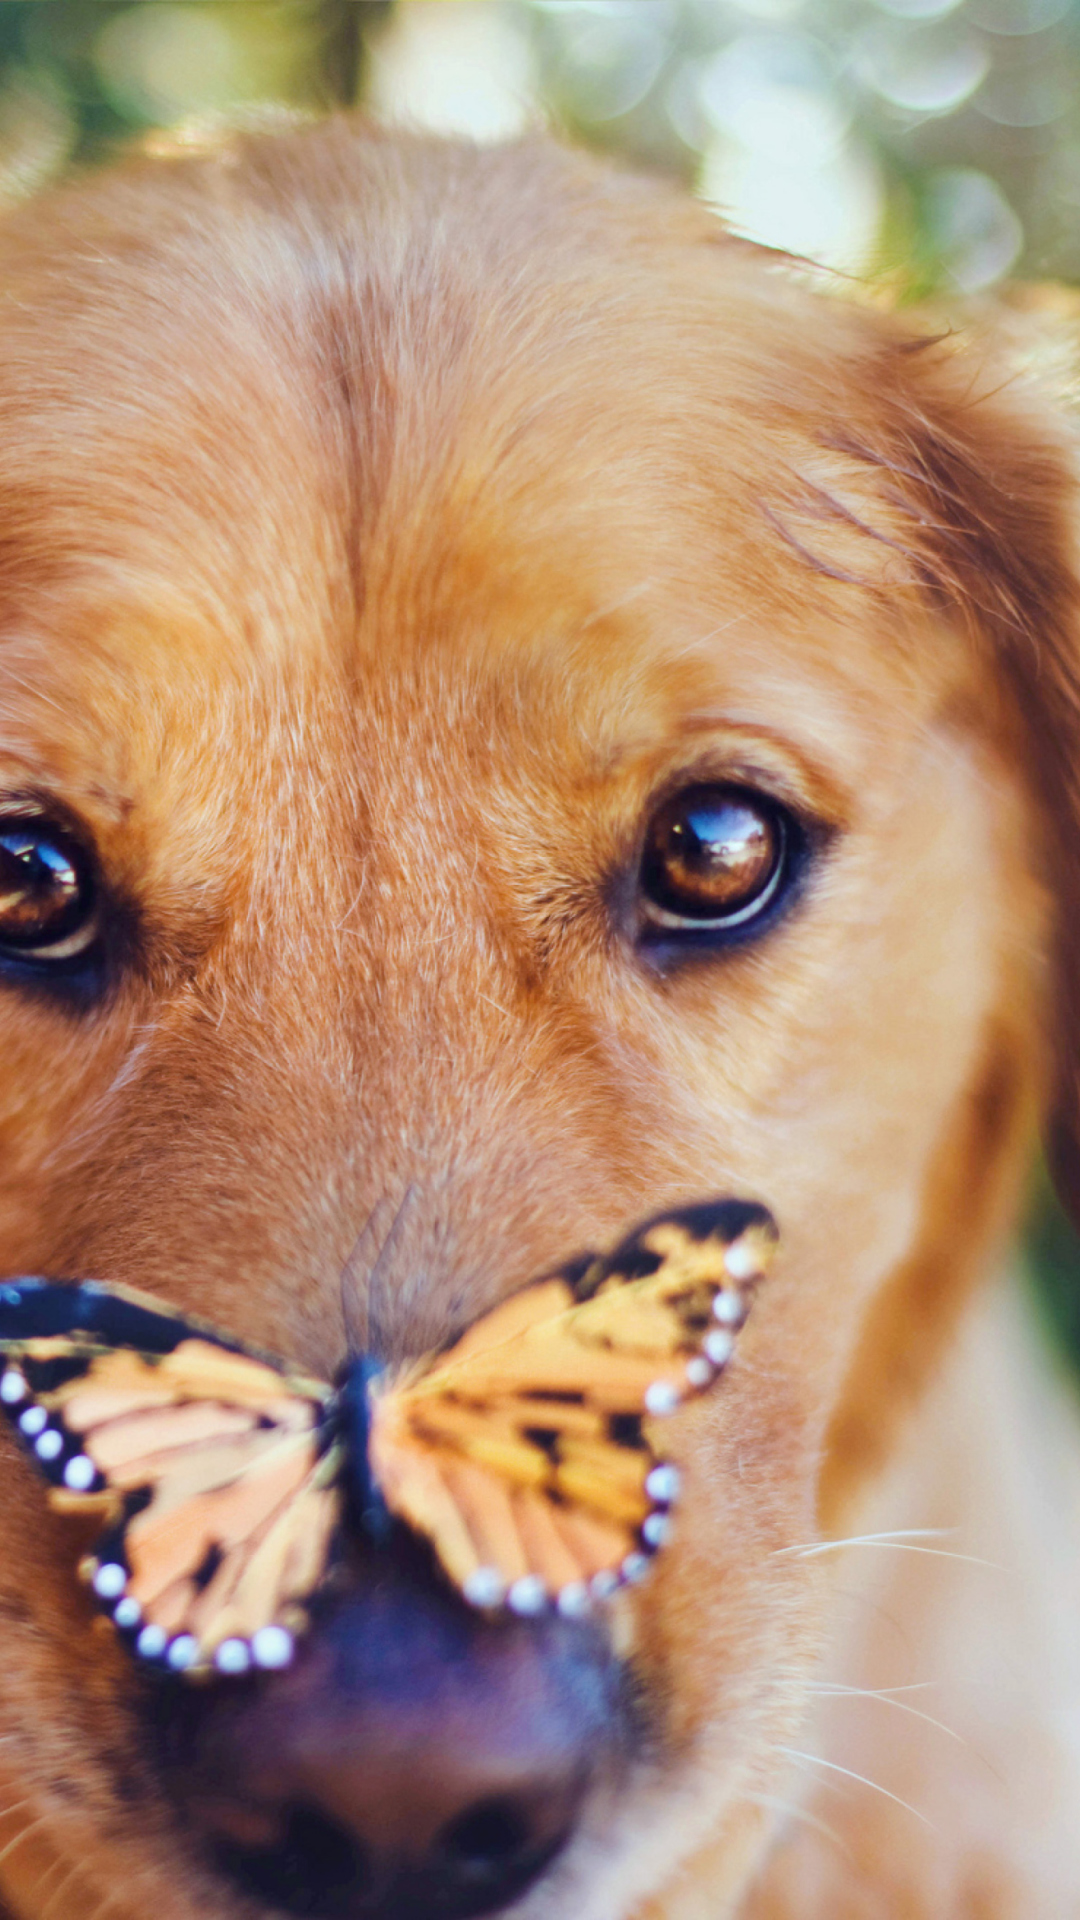 Dog And Butterfly wallpaper 1080x1920